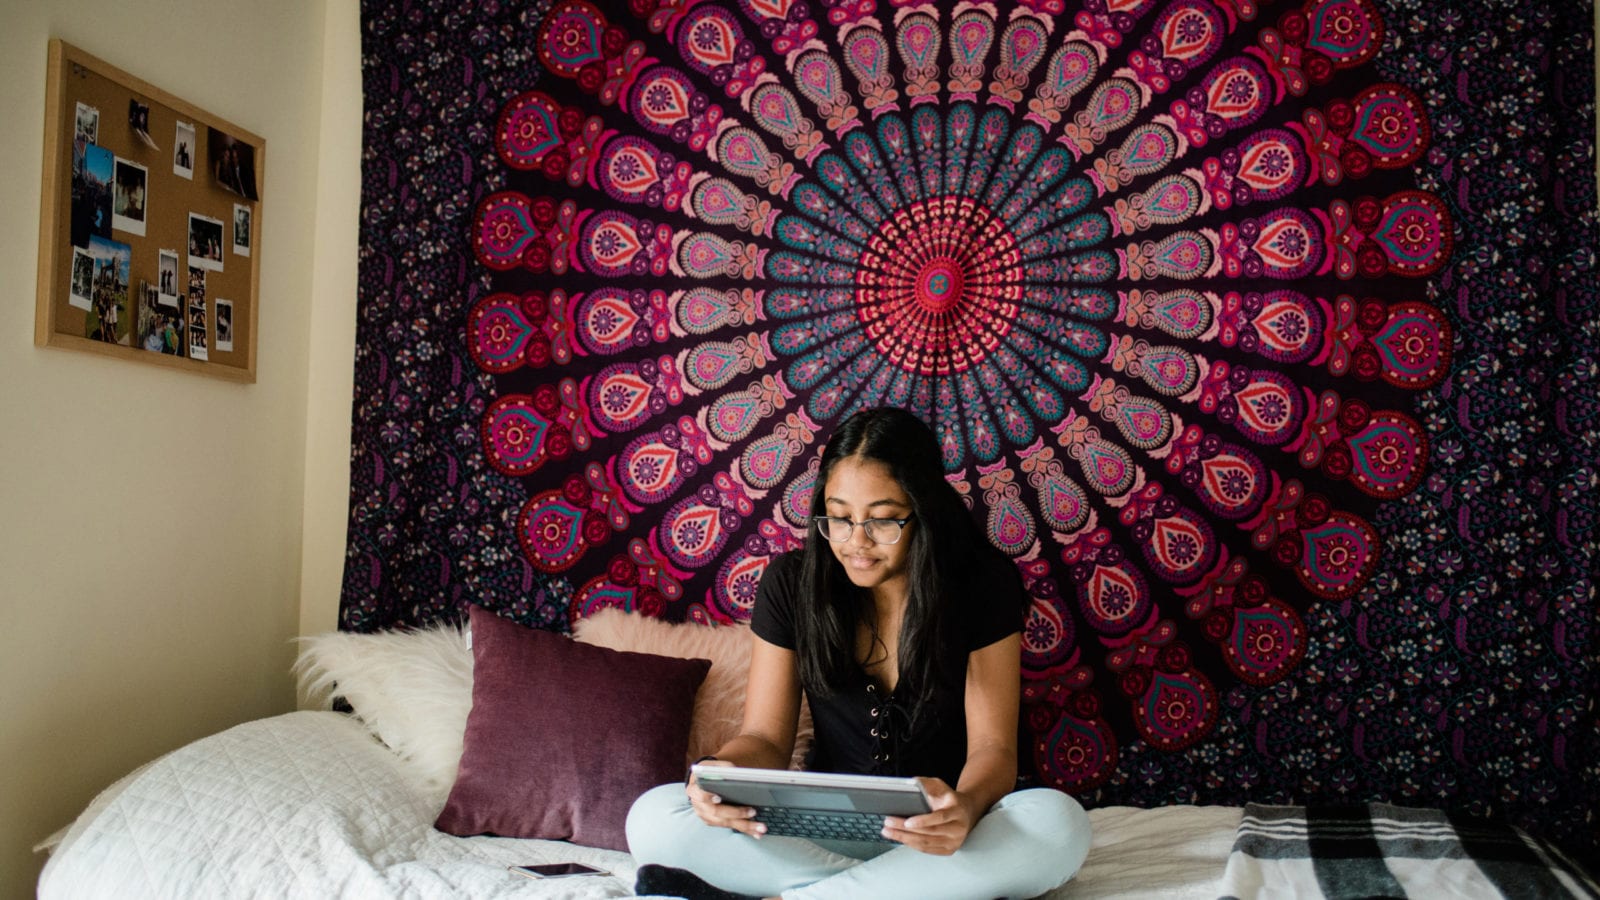 girl with glasses in dorm room sitting on bed in front of wall hanging